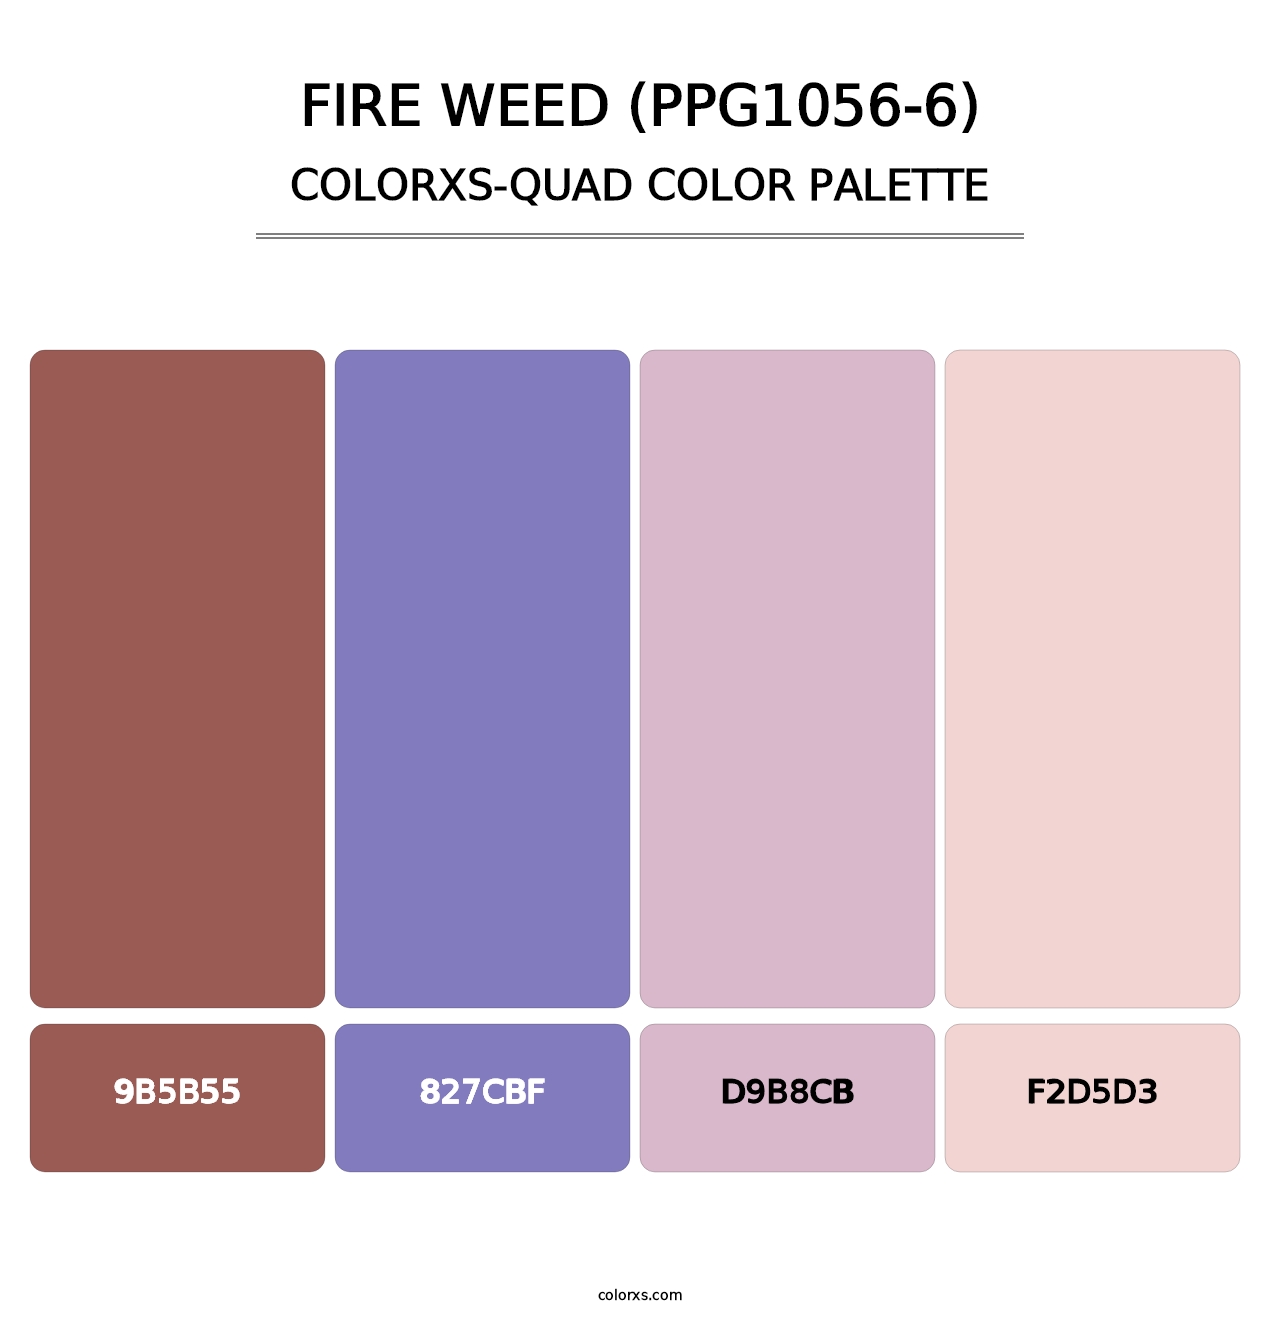 Fire Weed (PPG1056-6) - Colorxs Quad Palette